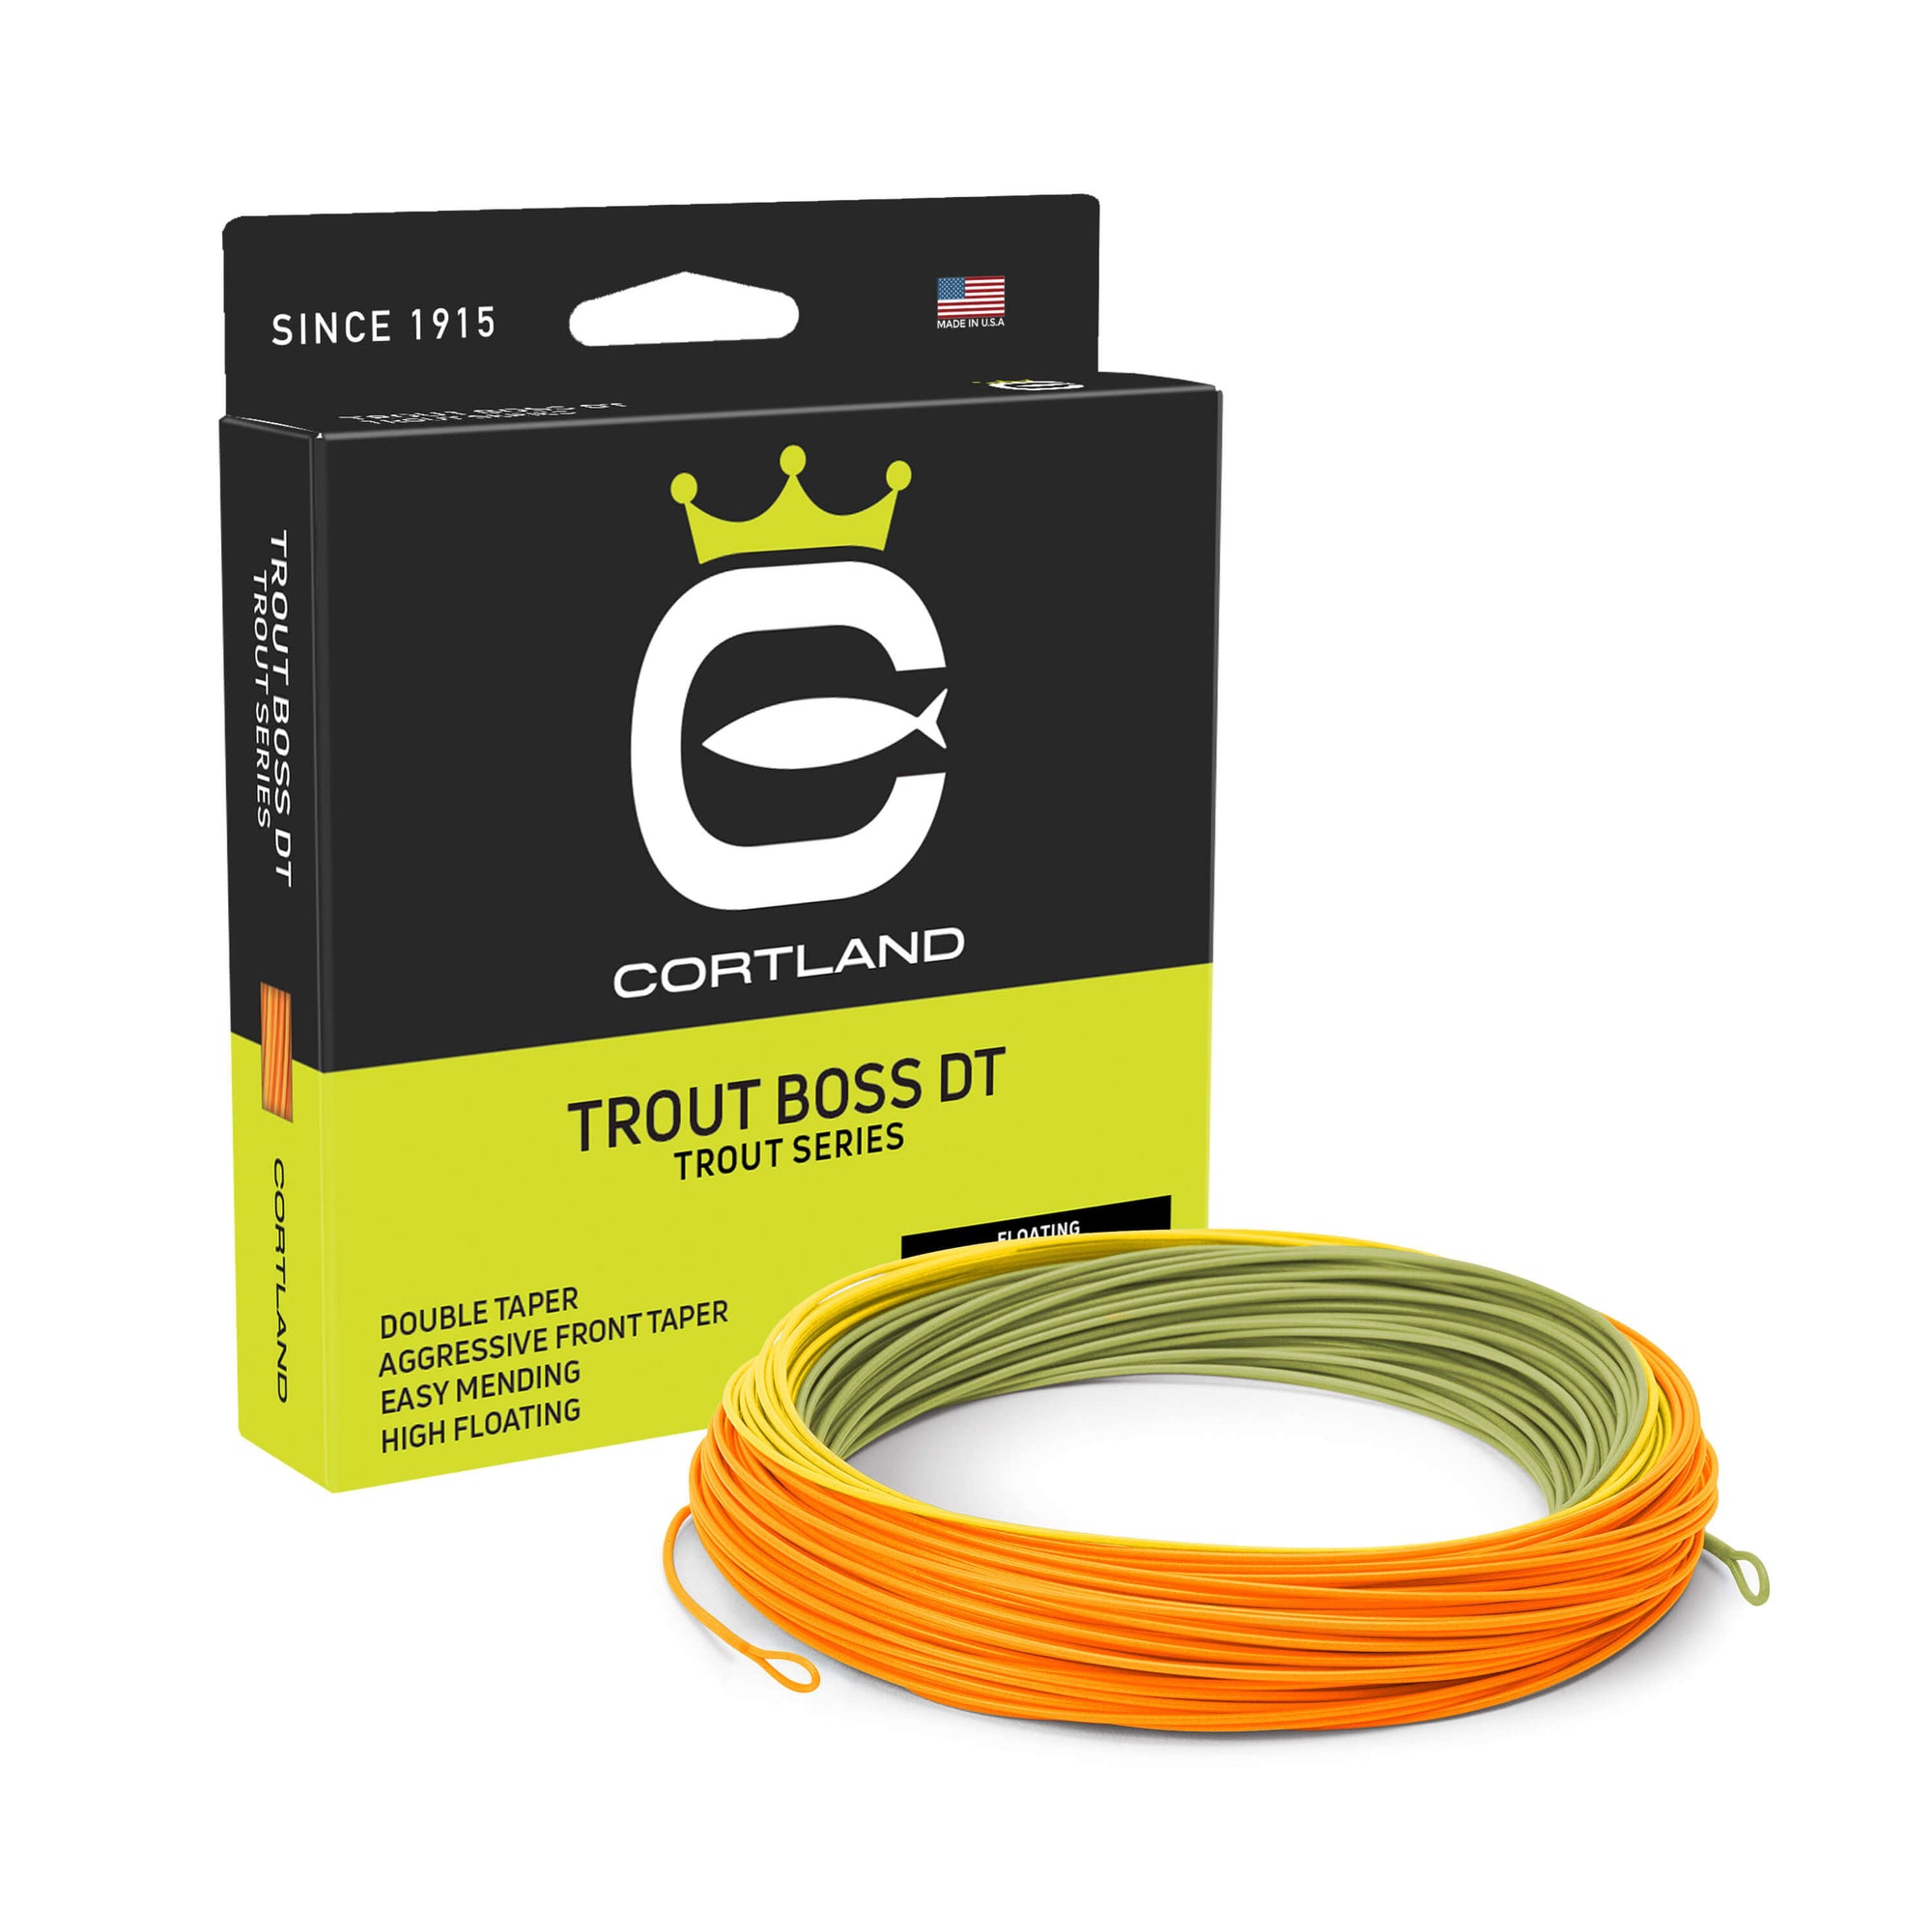 Trout Boss DT box and coil. The coil is moss green, yellow, and orange. The box has the Cortland logo and is black and greenish yellow. 